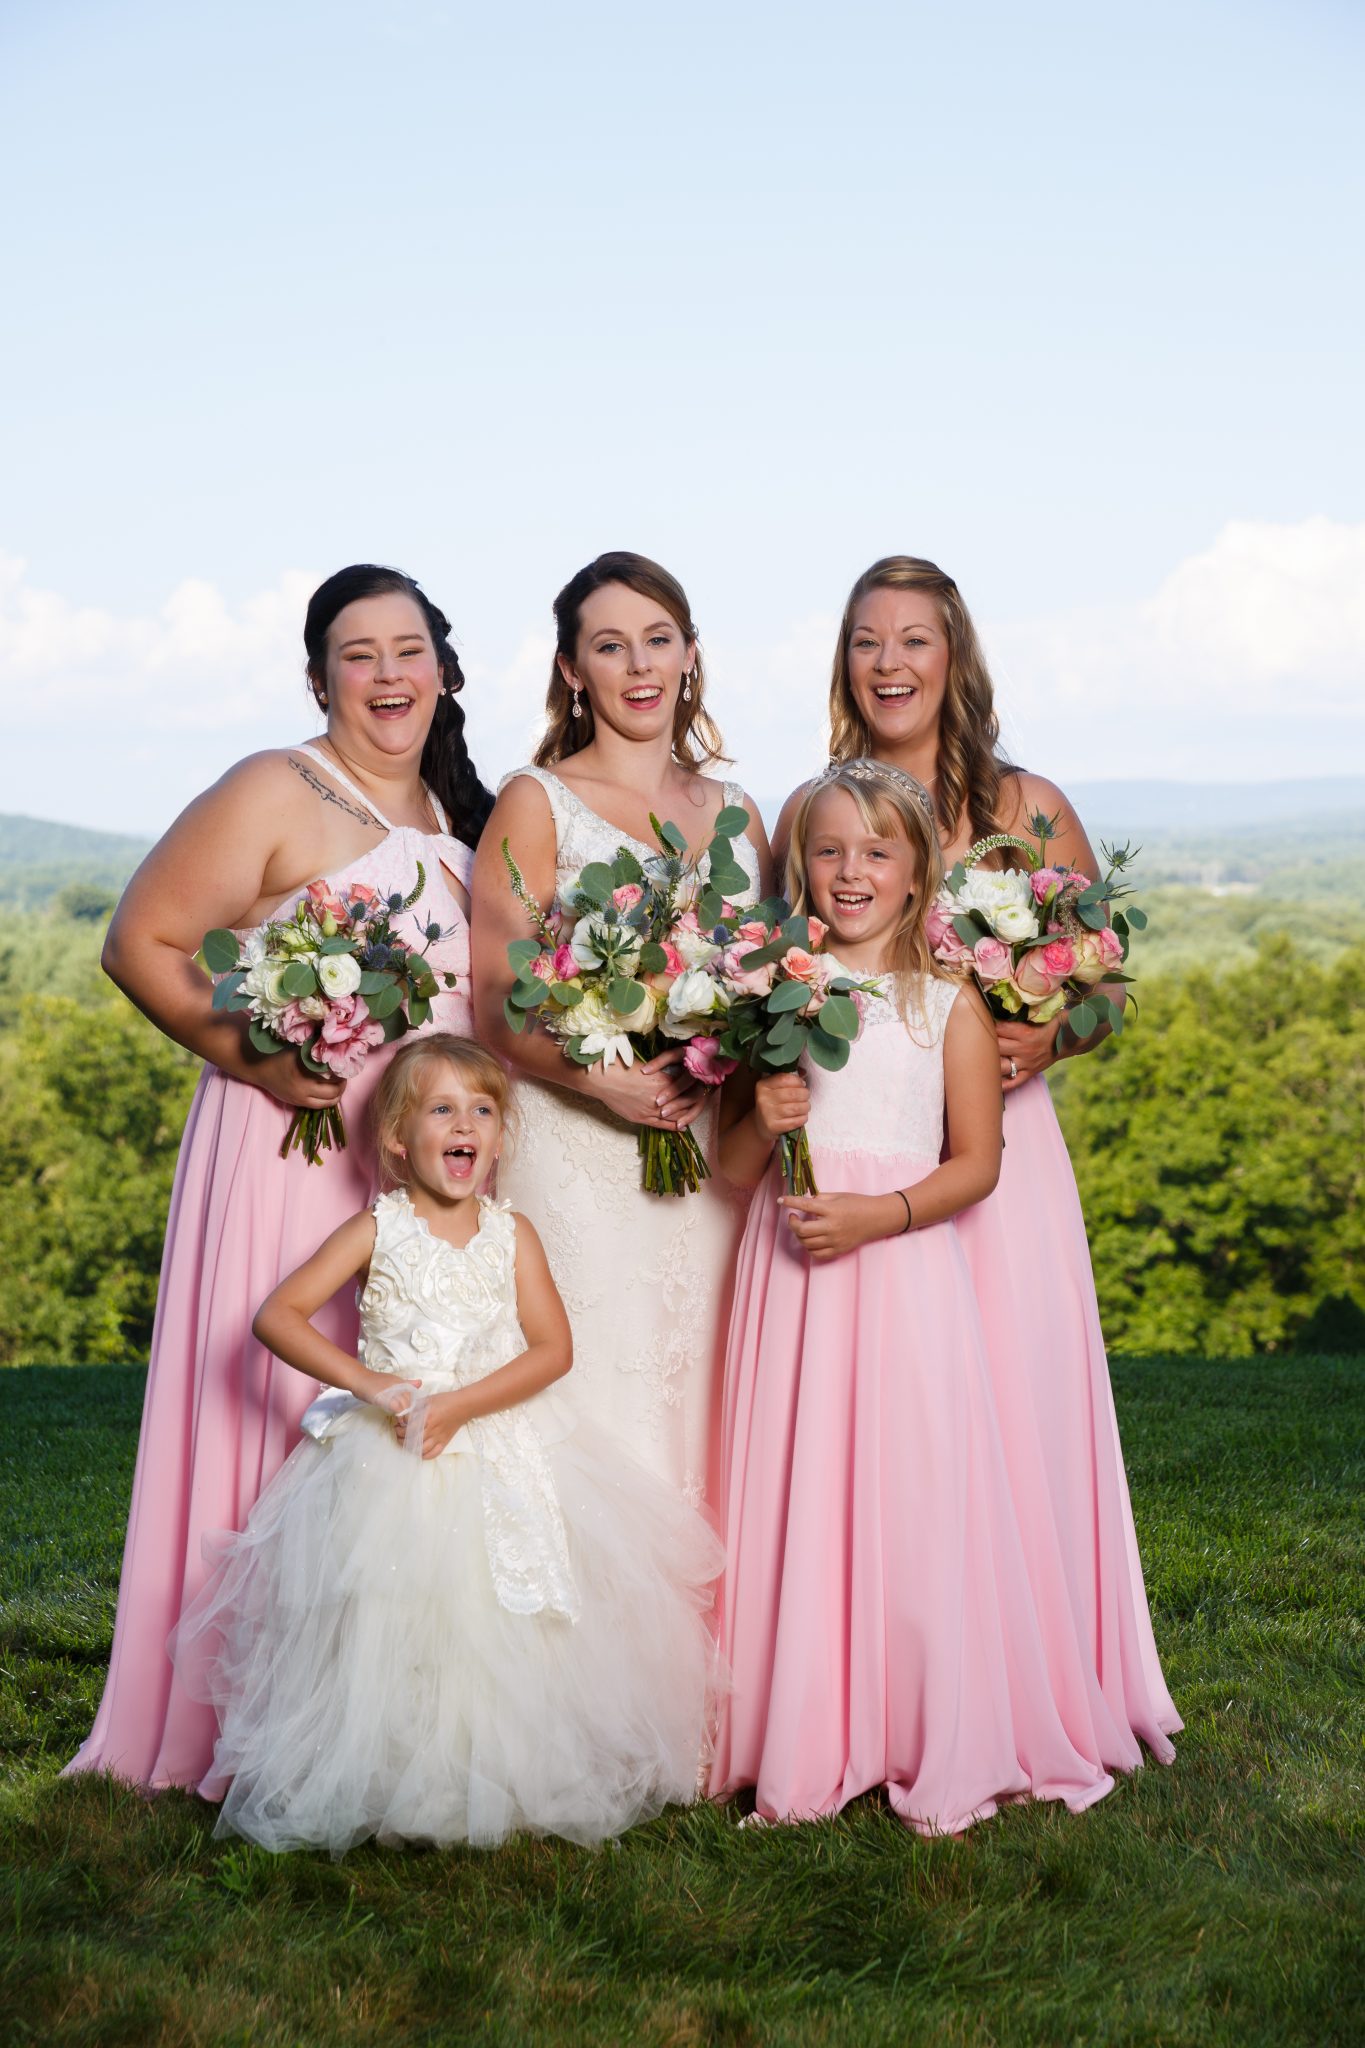 Bridal Party photo at the Mountain Rose